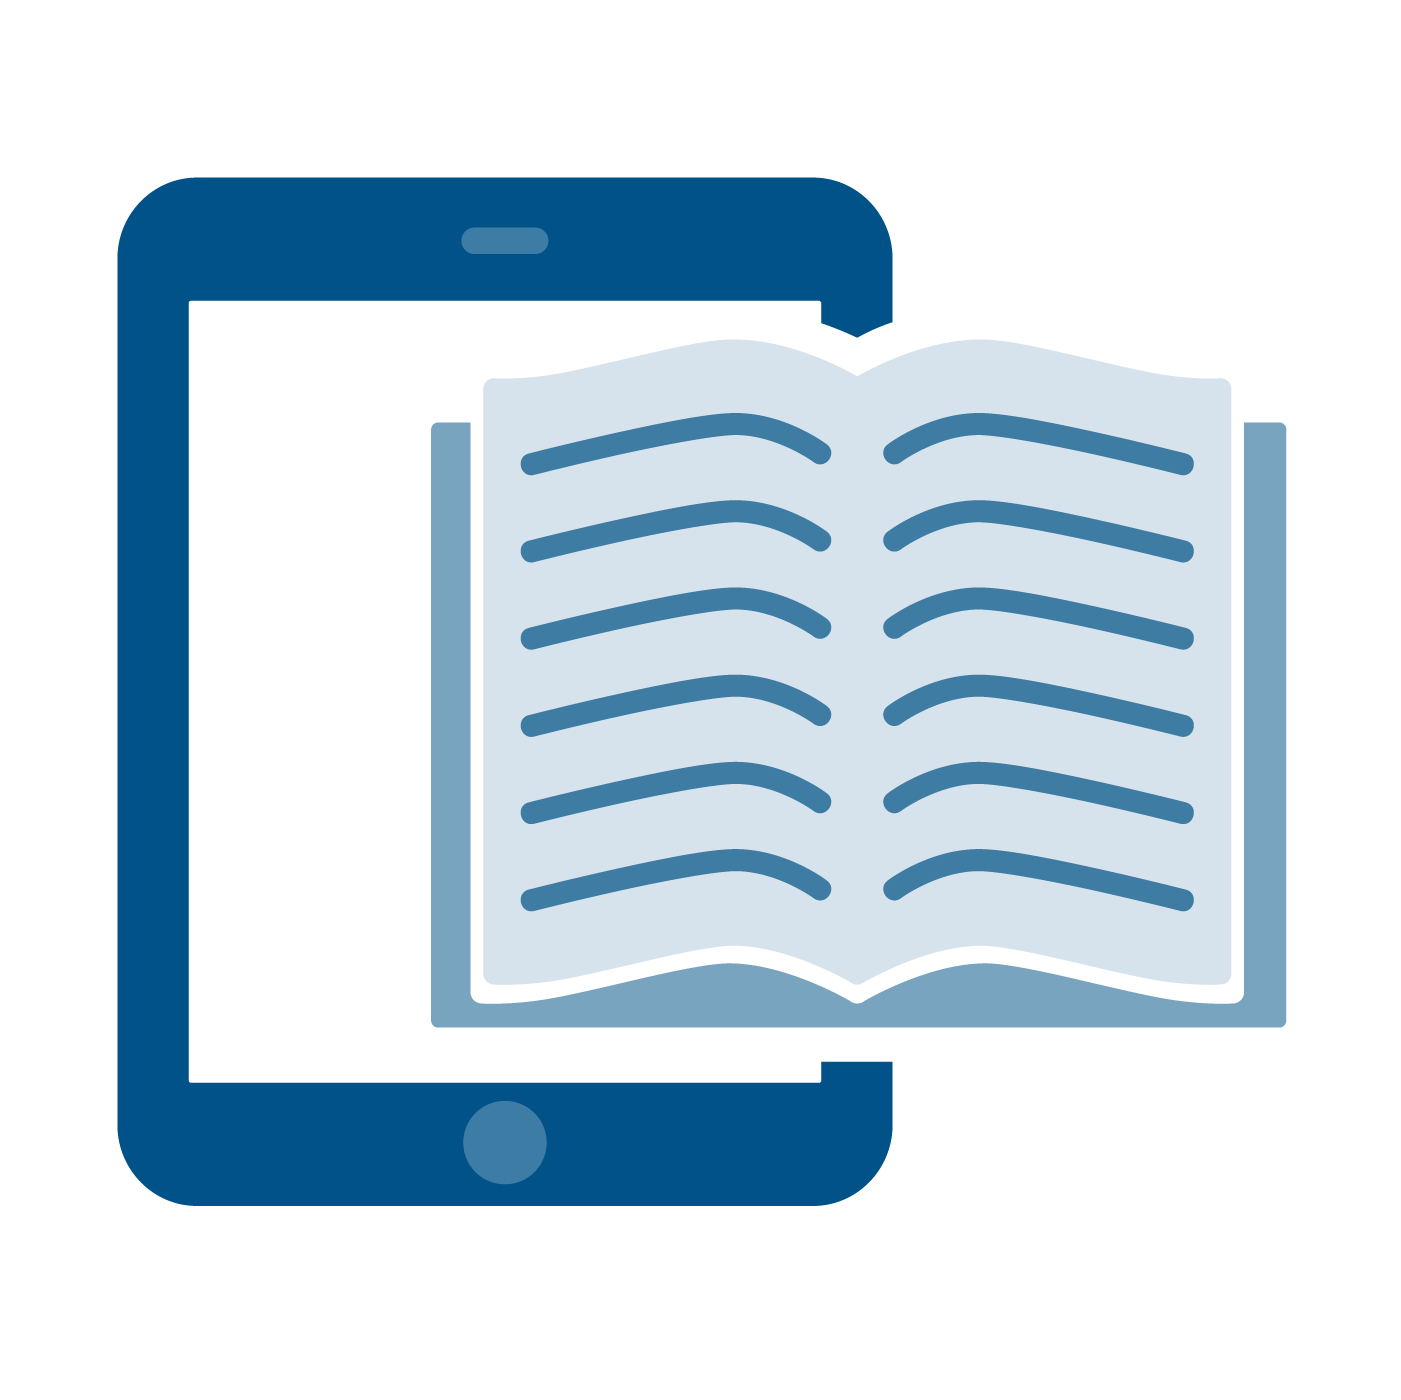 Illustration of an open book on top of an iPad